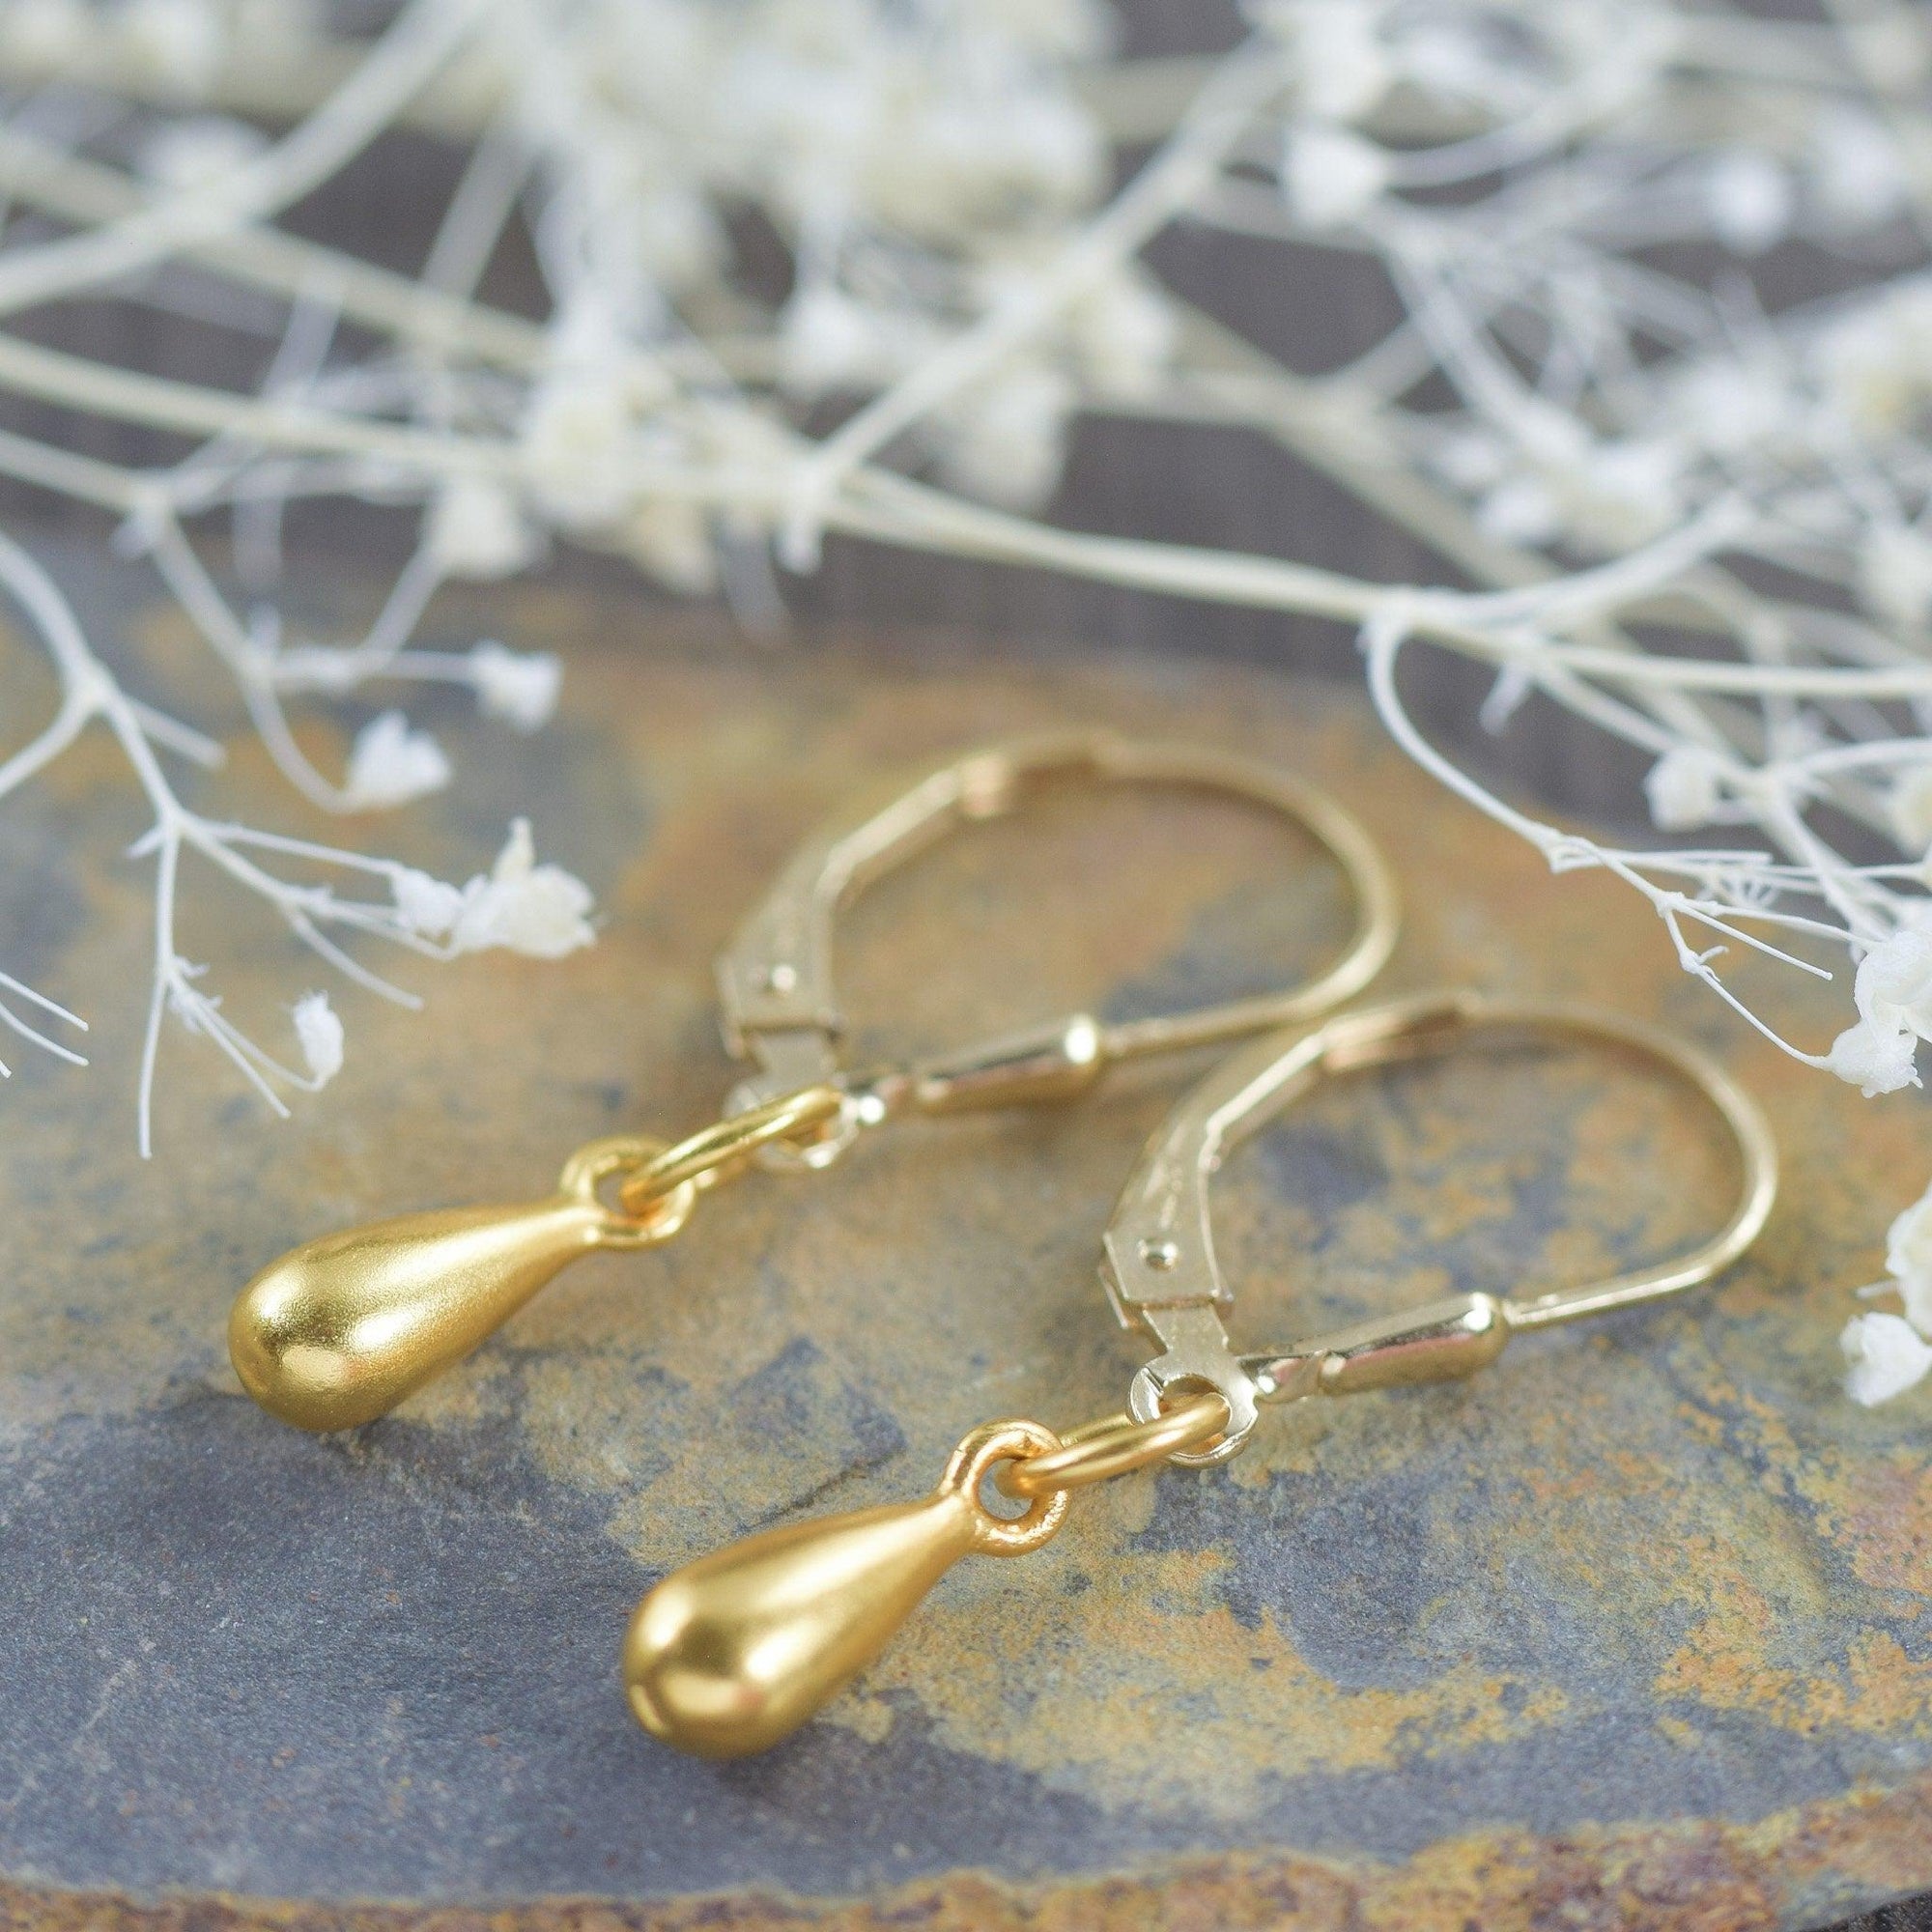 14K Gold vermeil teardrop necklace and / or earrings set, sold together or individually